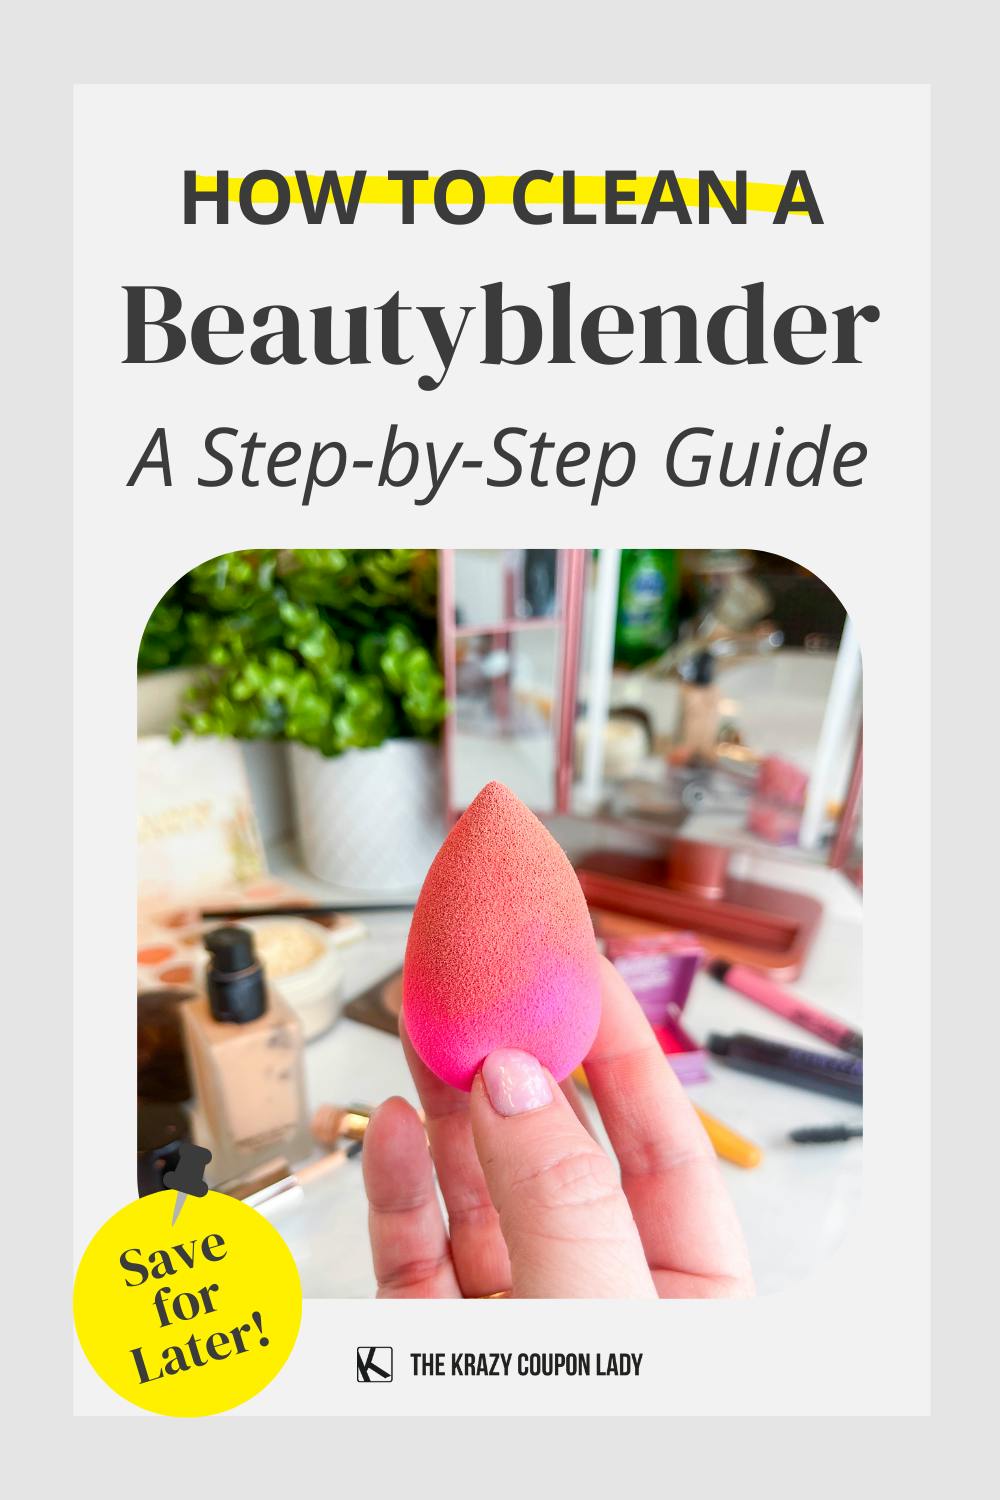 Got a Beautyblender? Here's How to Clean It for Easy Use